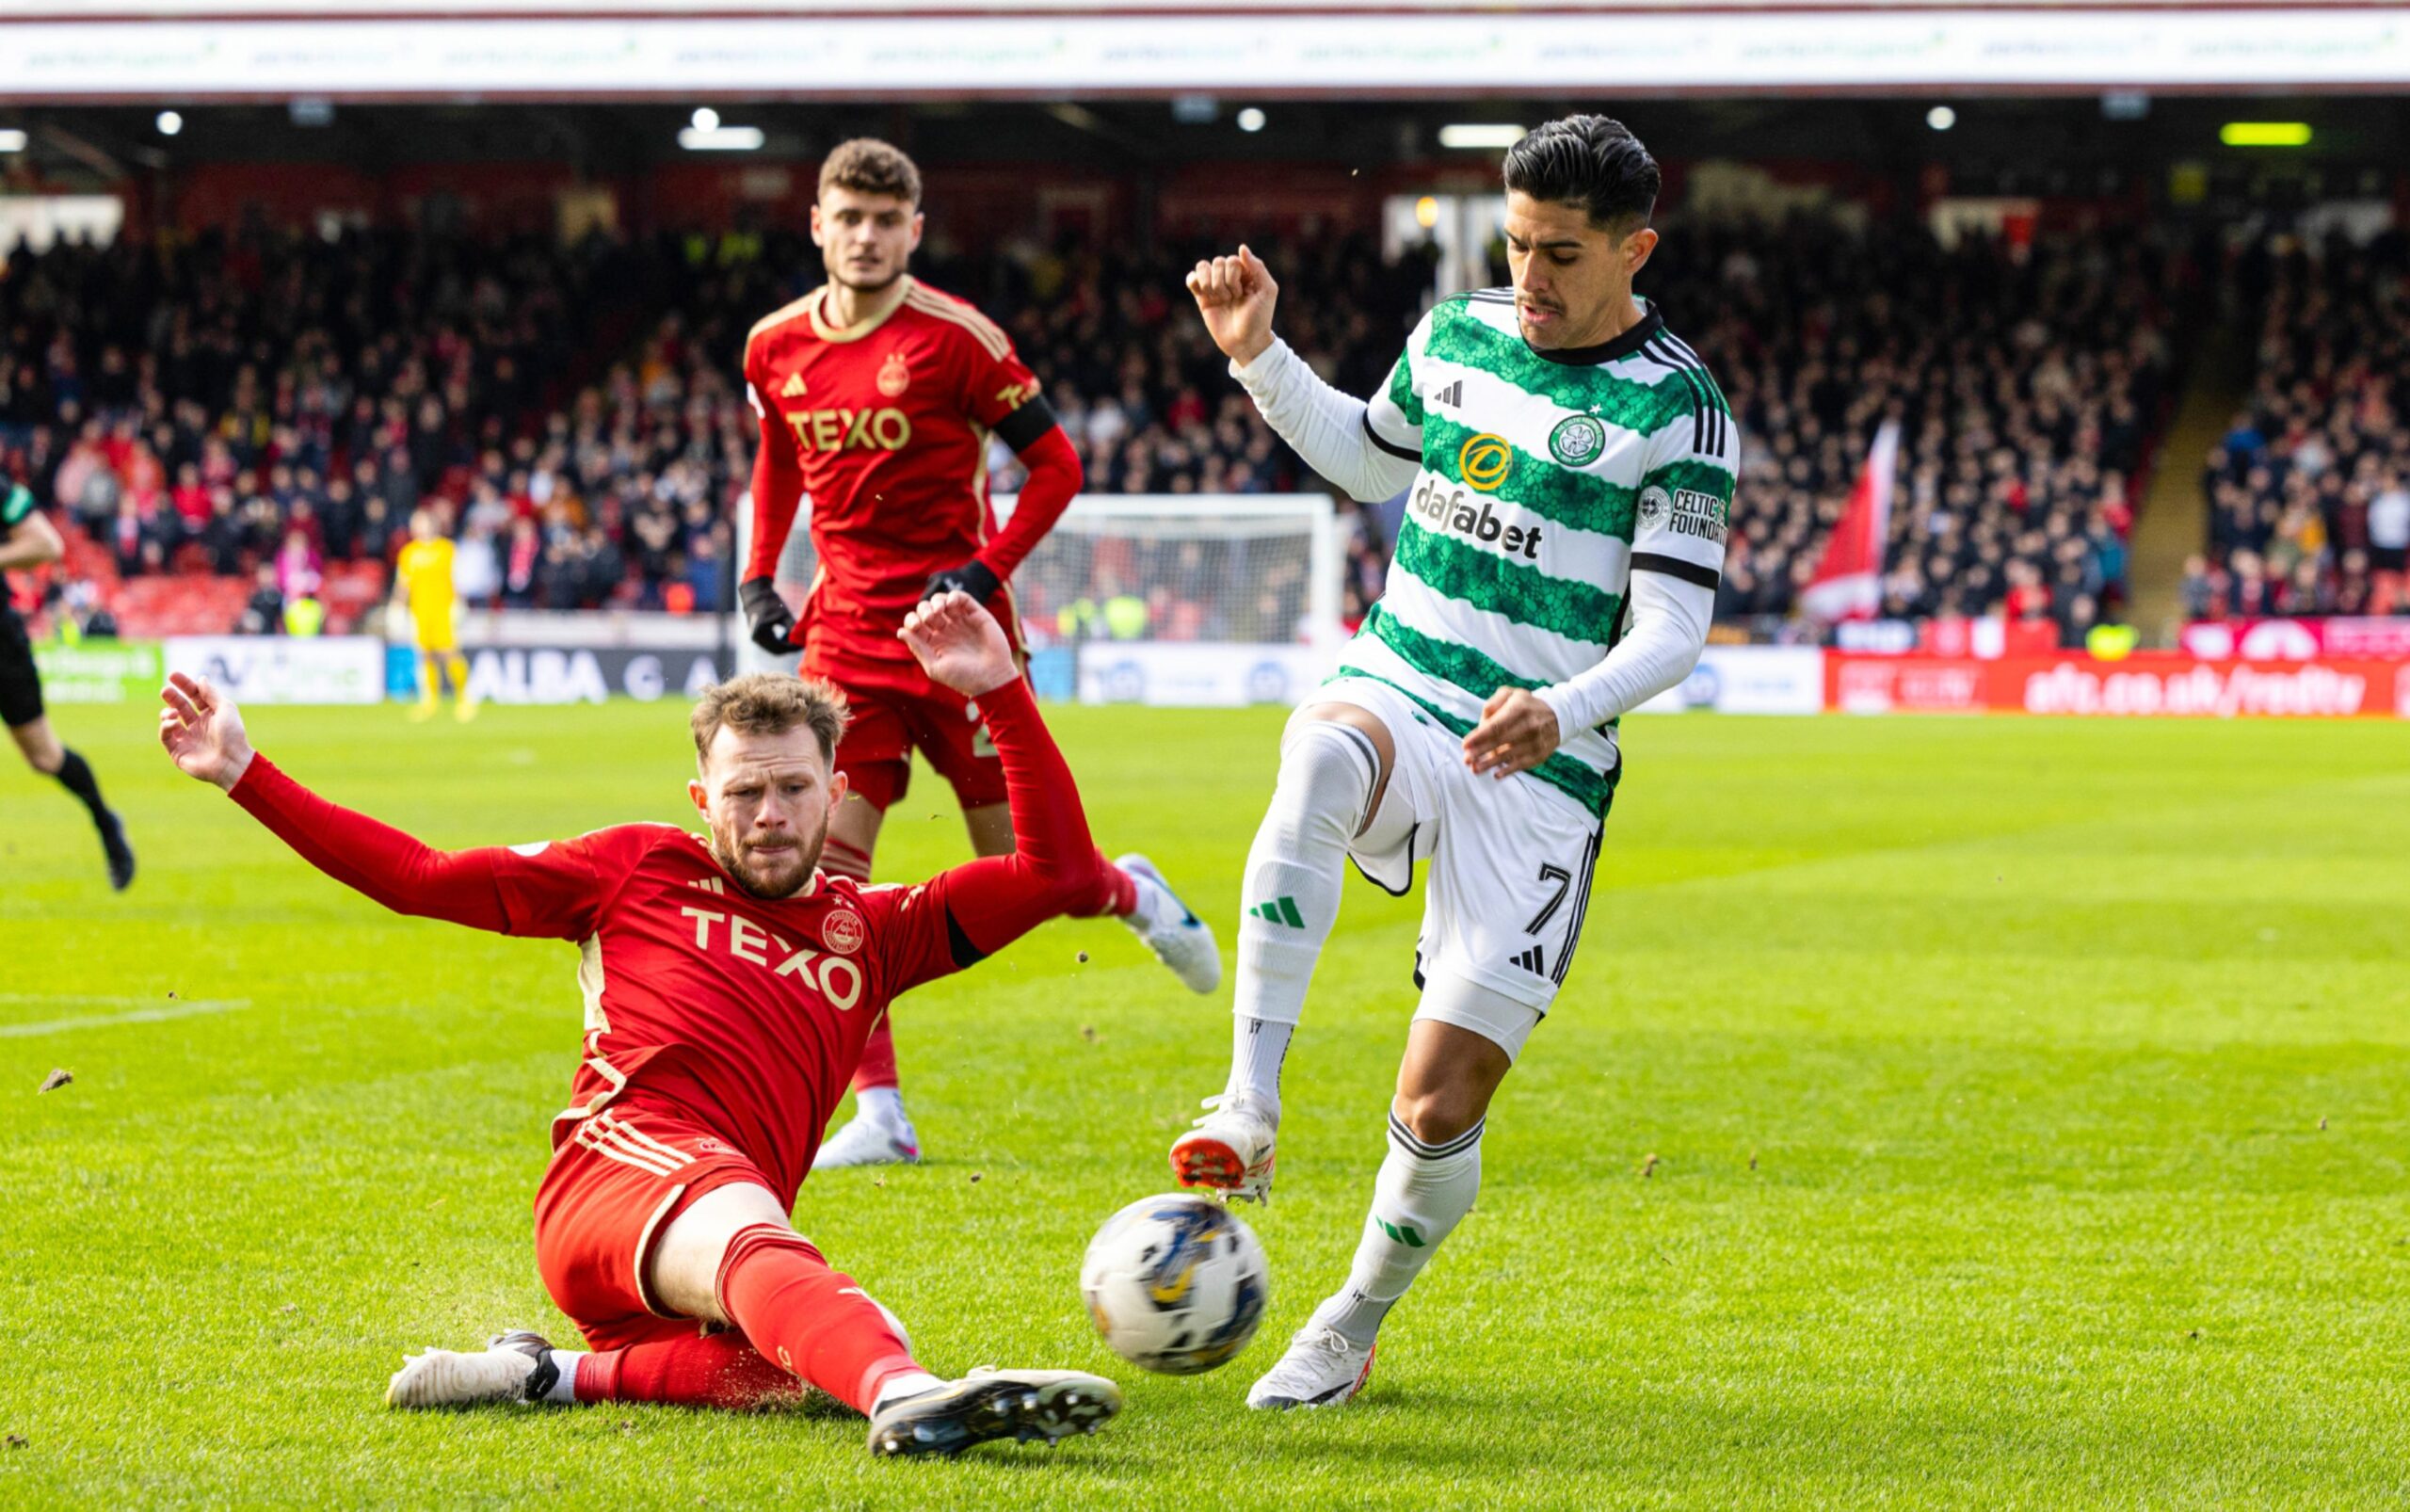 Aberdeen's Nicky Devlin and Celtic's Luis Palma in action in a Premiership match at Pittodrie. Image: SNS 